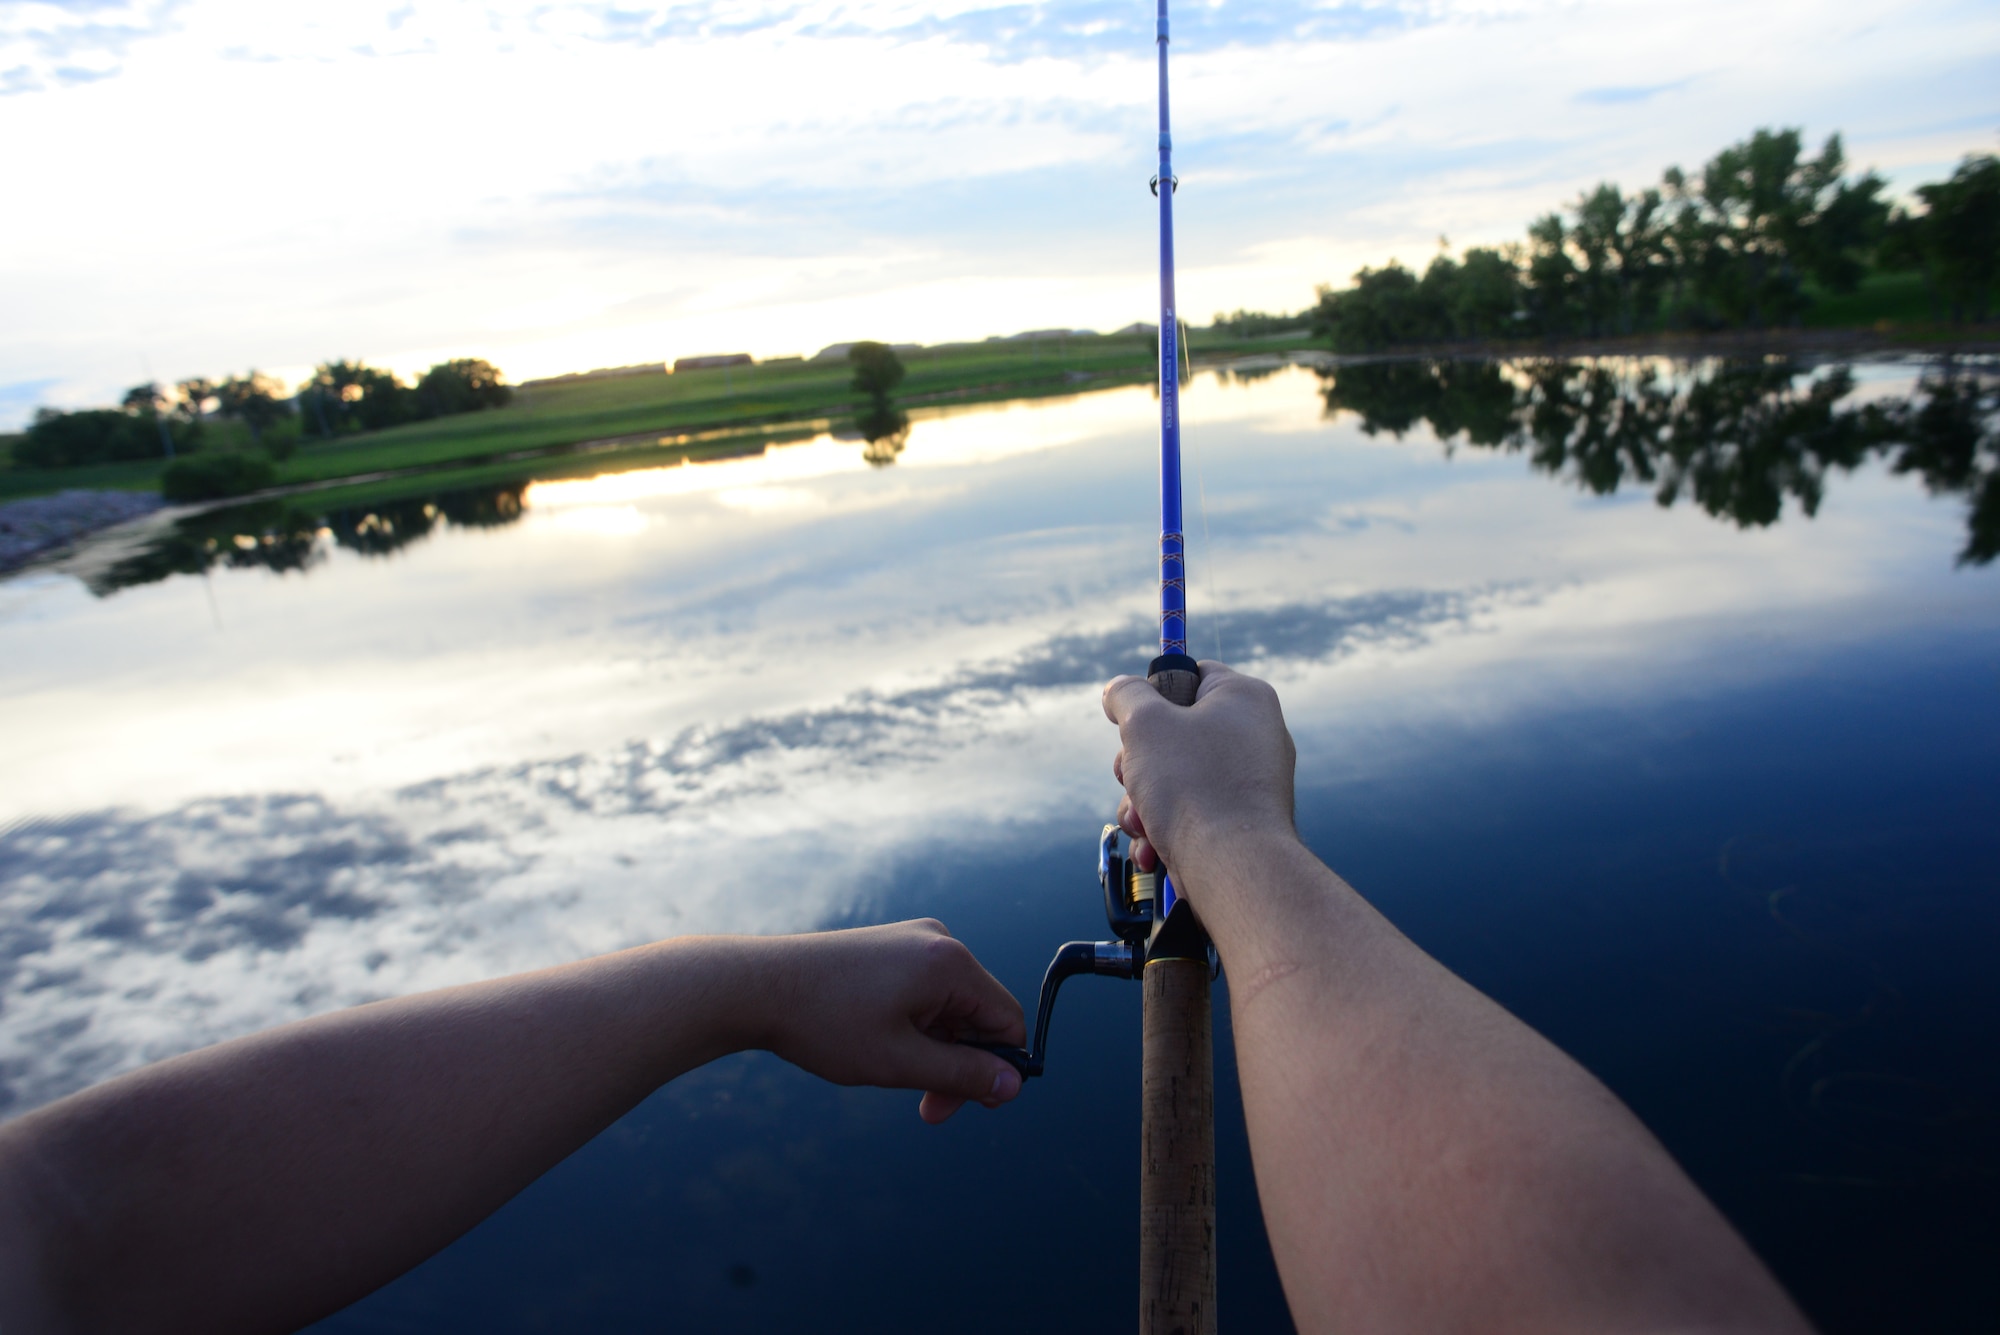 Airman John Ennis, a 28th Bomb Wing Public Affairs broadcast journalist, reels his rod at Gateway Lake on Ellsworth Air Force Base, S.D., July 12, 2018. Some fish species are allowed to be entered in South Dakota fishing records. (U.S. Air Force photo by Airman 1st Class Nicolas Z. Erwin)